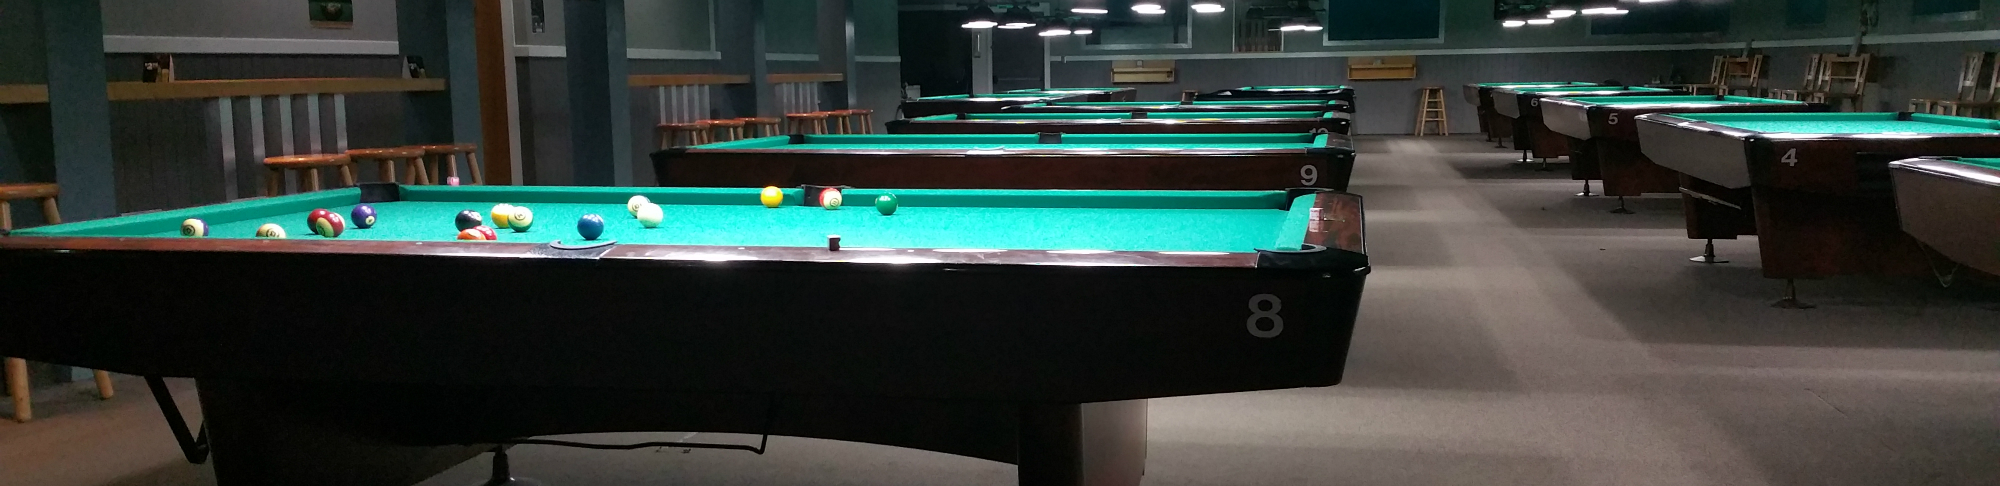 Close Up Image of Billiard Tables